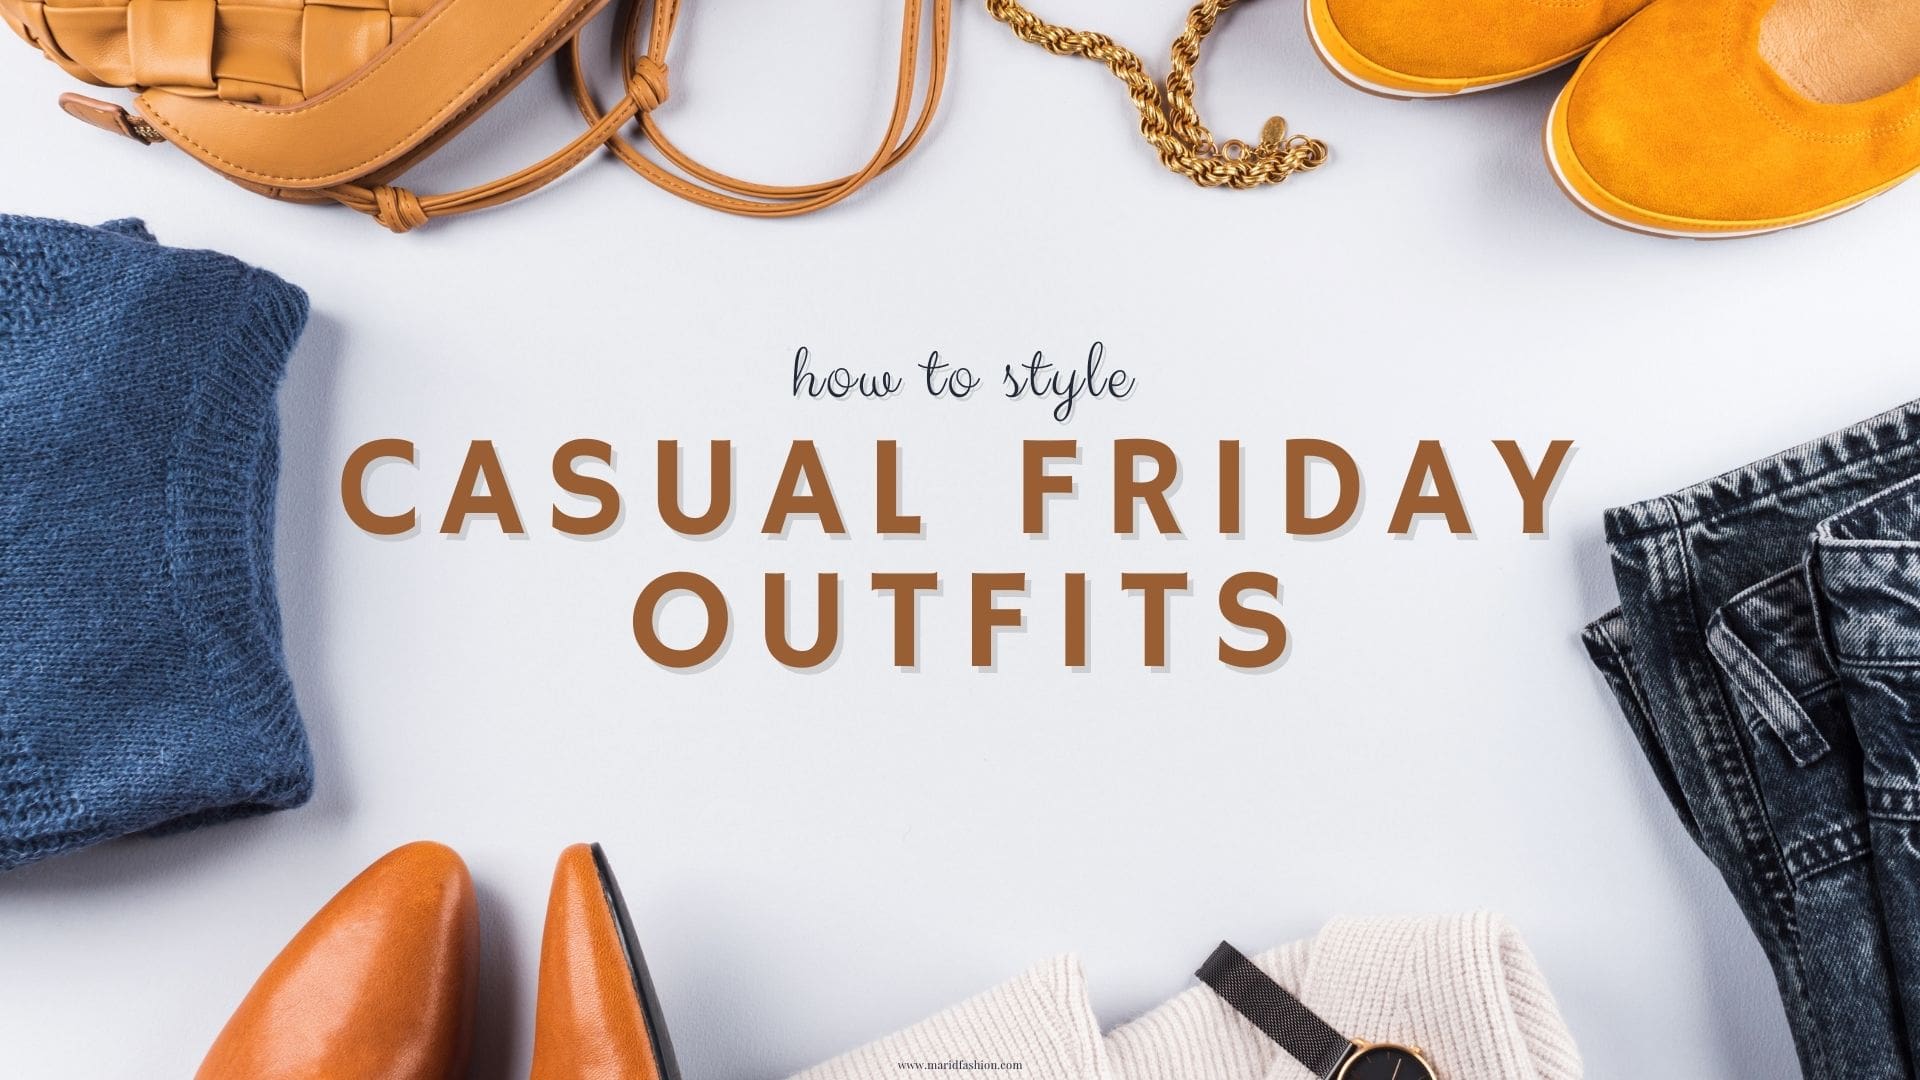 16 Awesome Casual Friday Work Outfits to Look Classy and Still Feel Comfy at Office